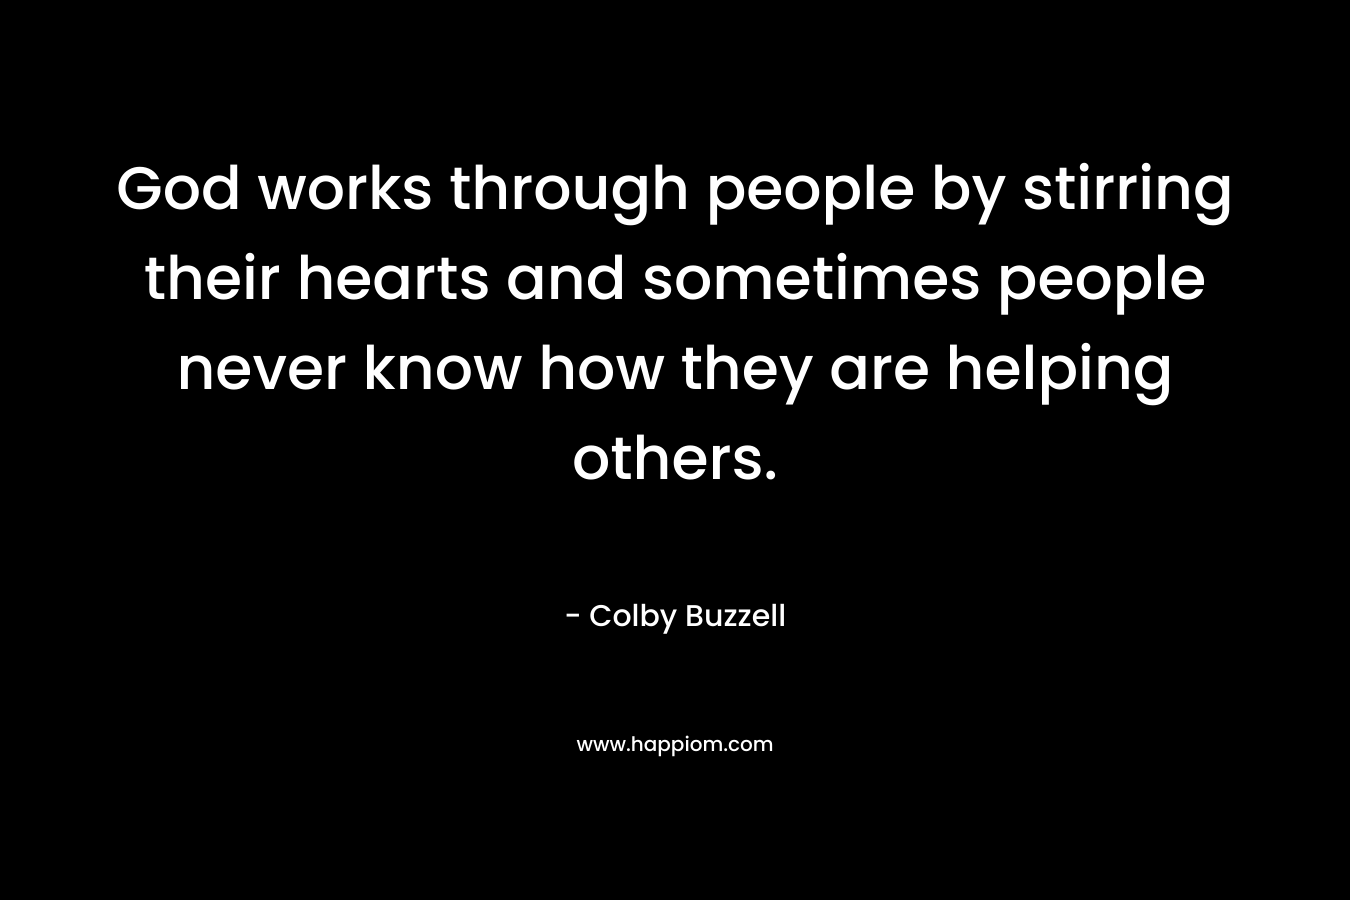 God works through people by stirring their hearts and sometimes people never know how they are helping others.